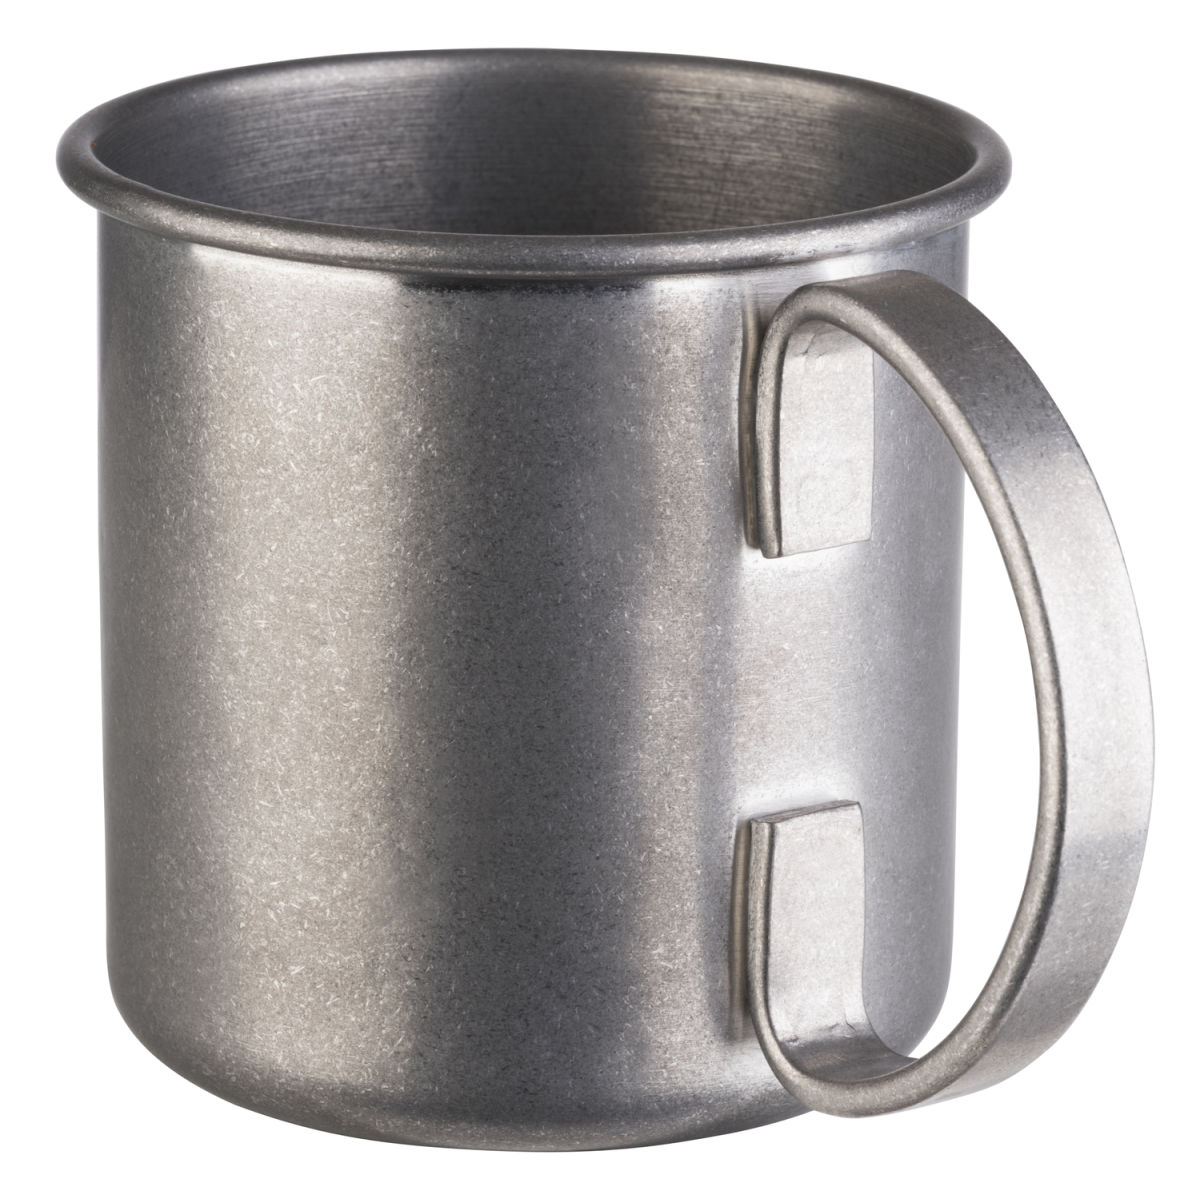 APS Beker Moscow Mule; 450ml, 9x9 cm (ØxH); roestvrij staal